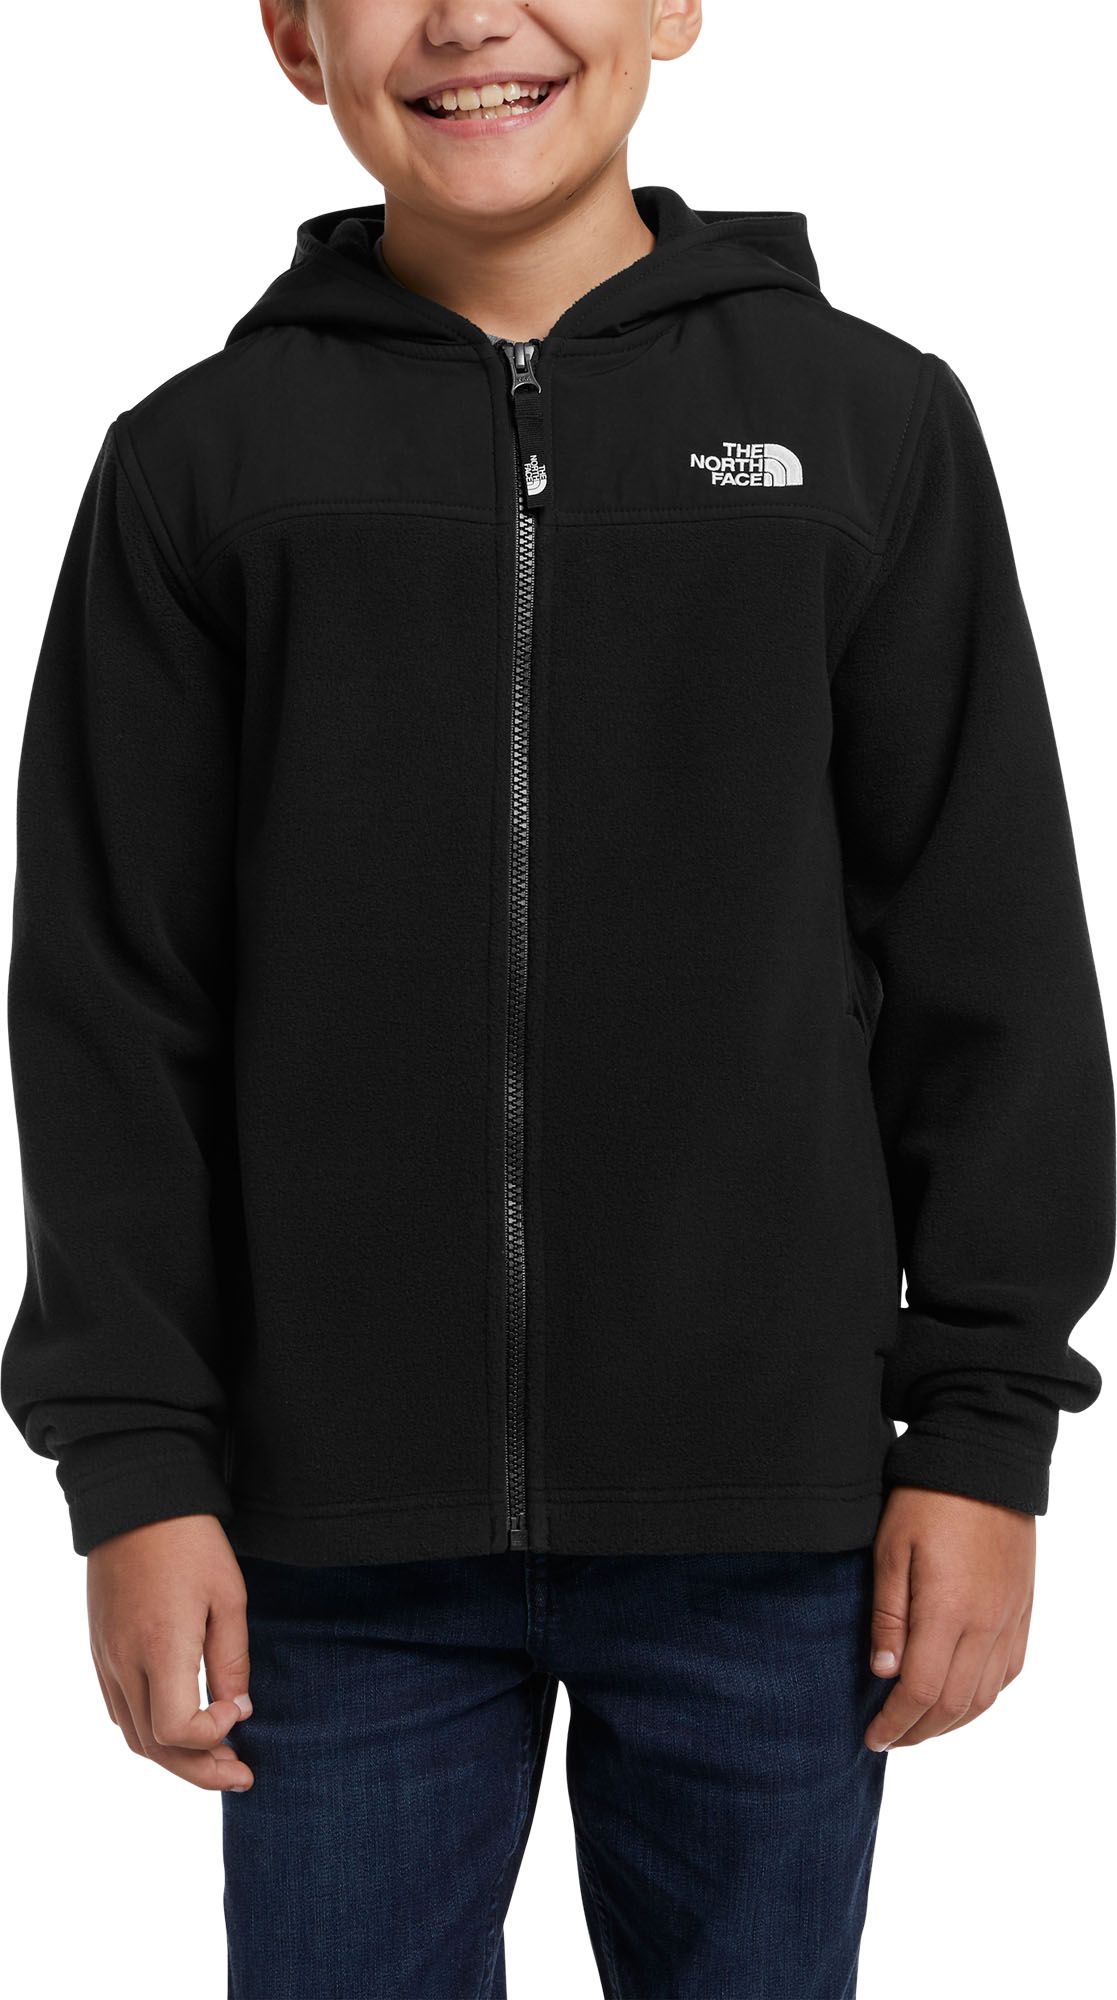 boys north face sweater